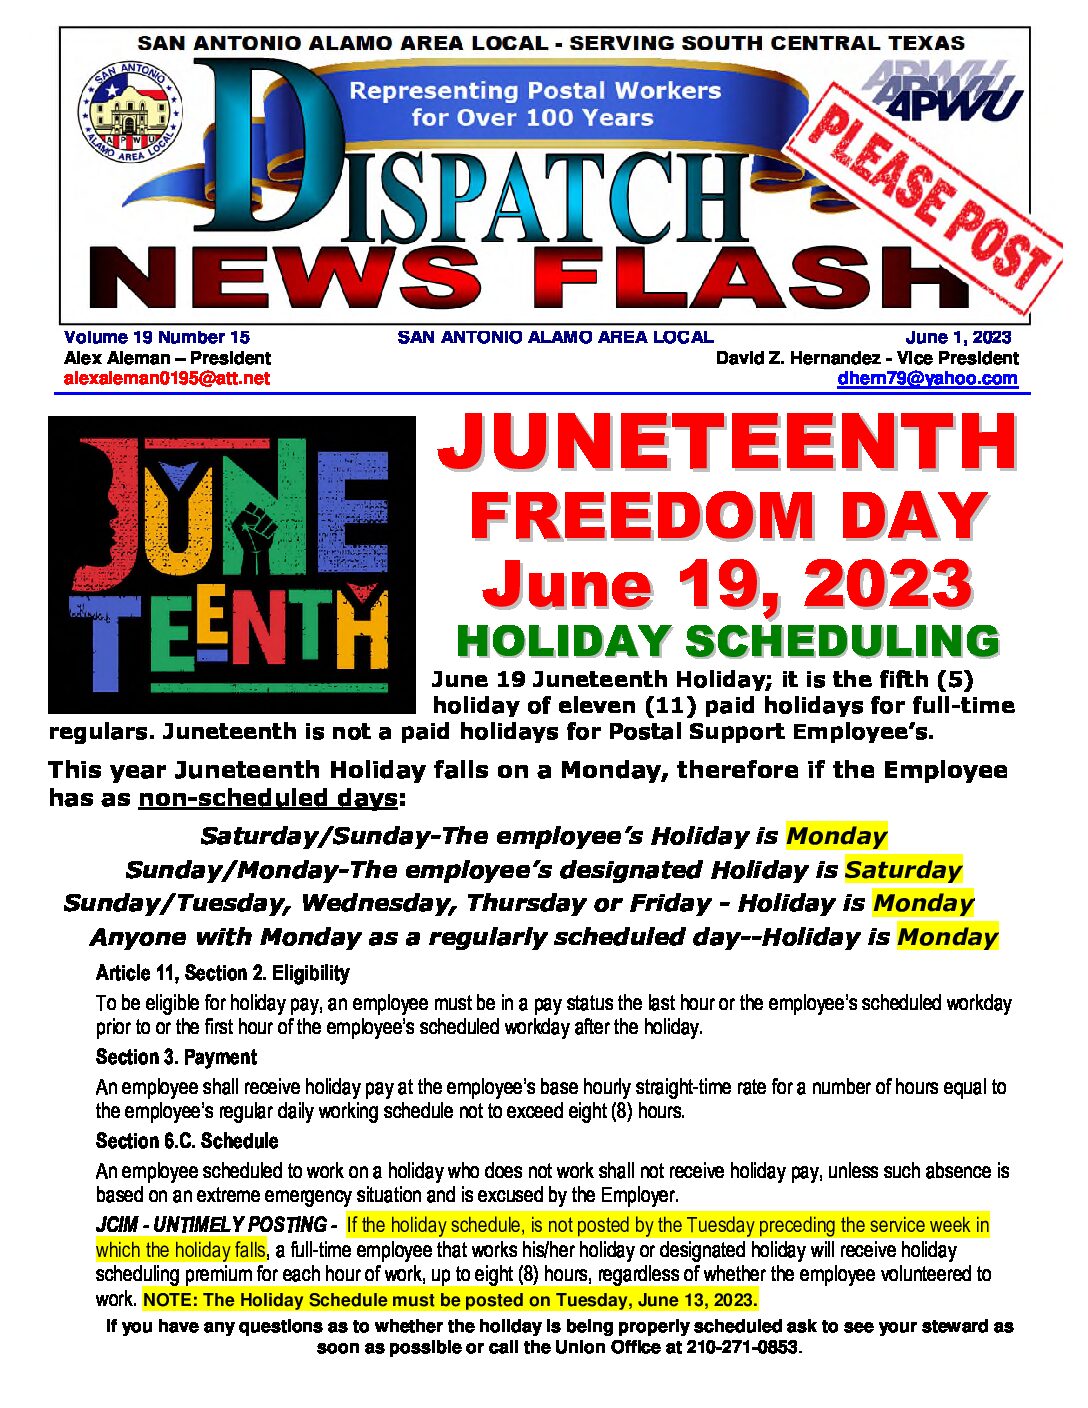 NewFlash 19-15 Juneteeth Holiday Scheduling - 